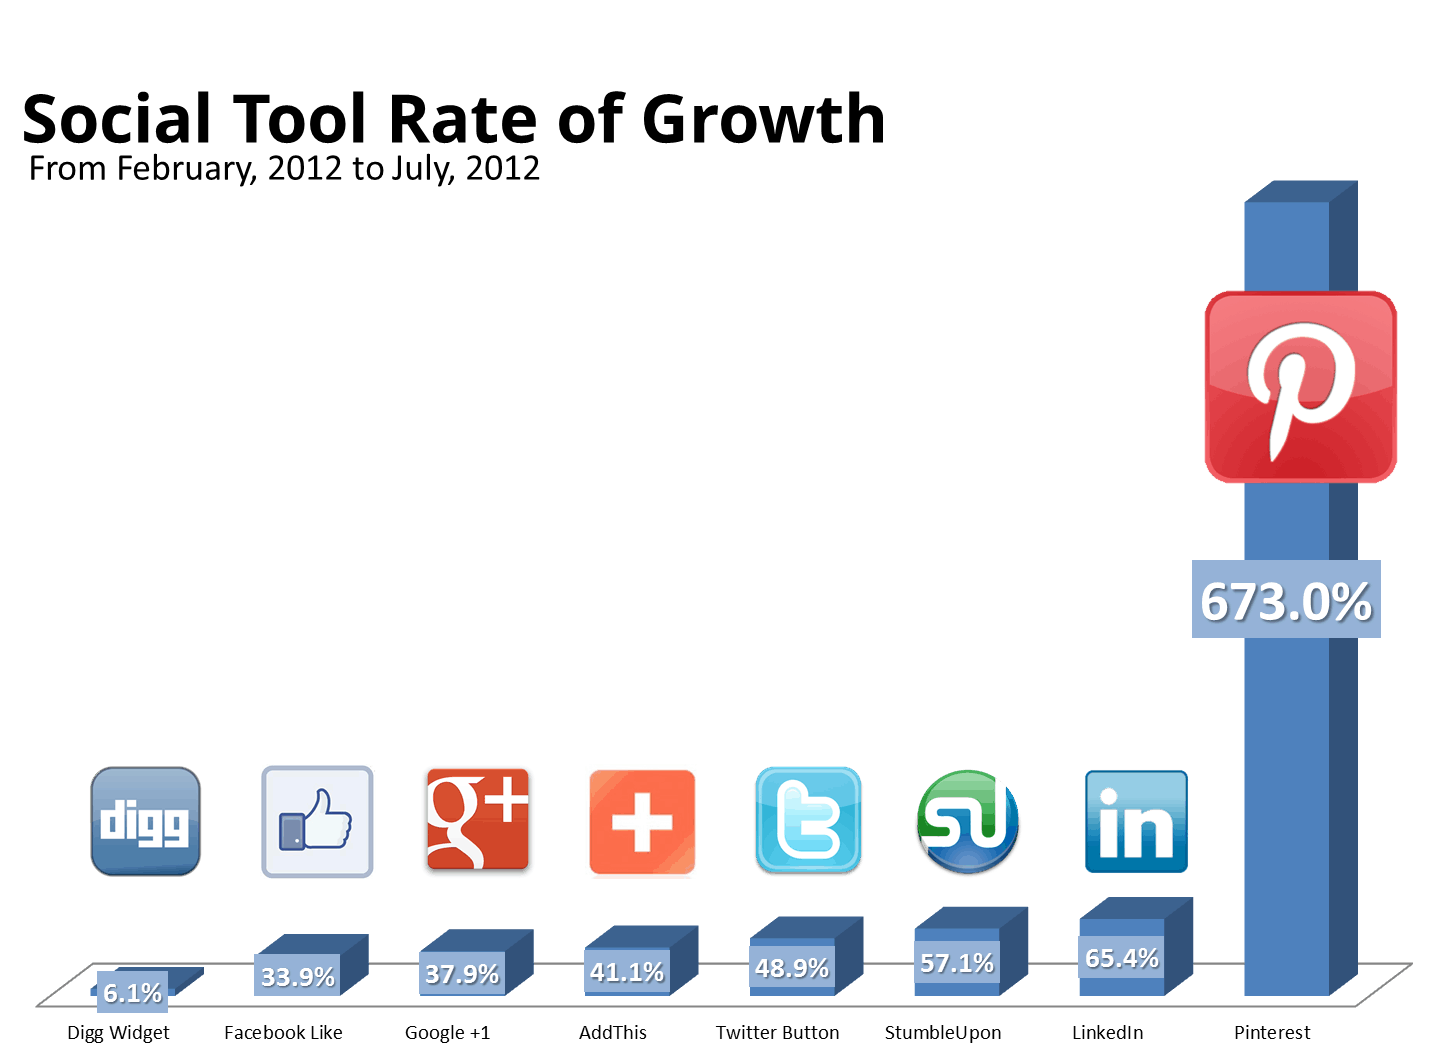 Pinterest Growth compared to Other Social Platforms